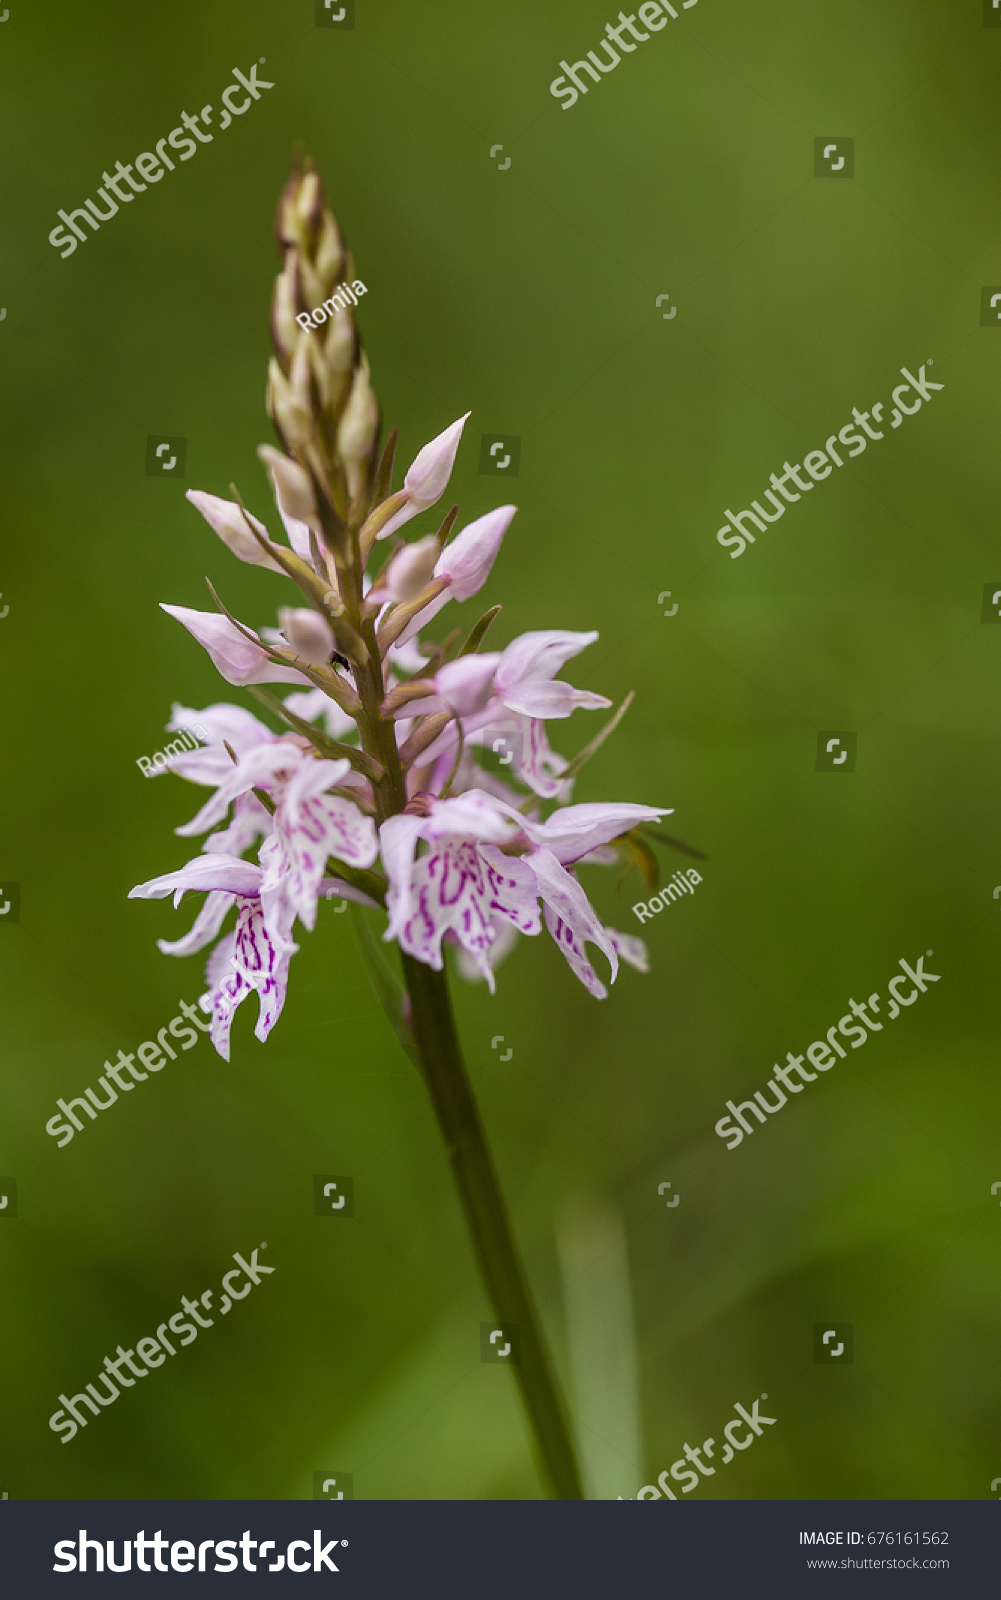 A beautiful rare pink wild orchid blossoming in the summer marsh. Closeup macro photo, shallow depth of field. #676161562